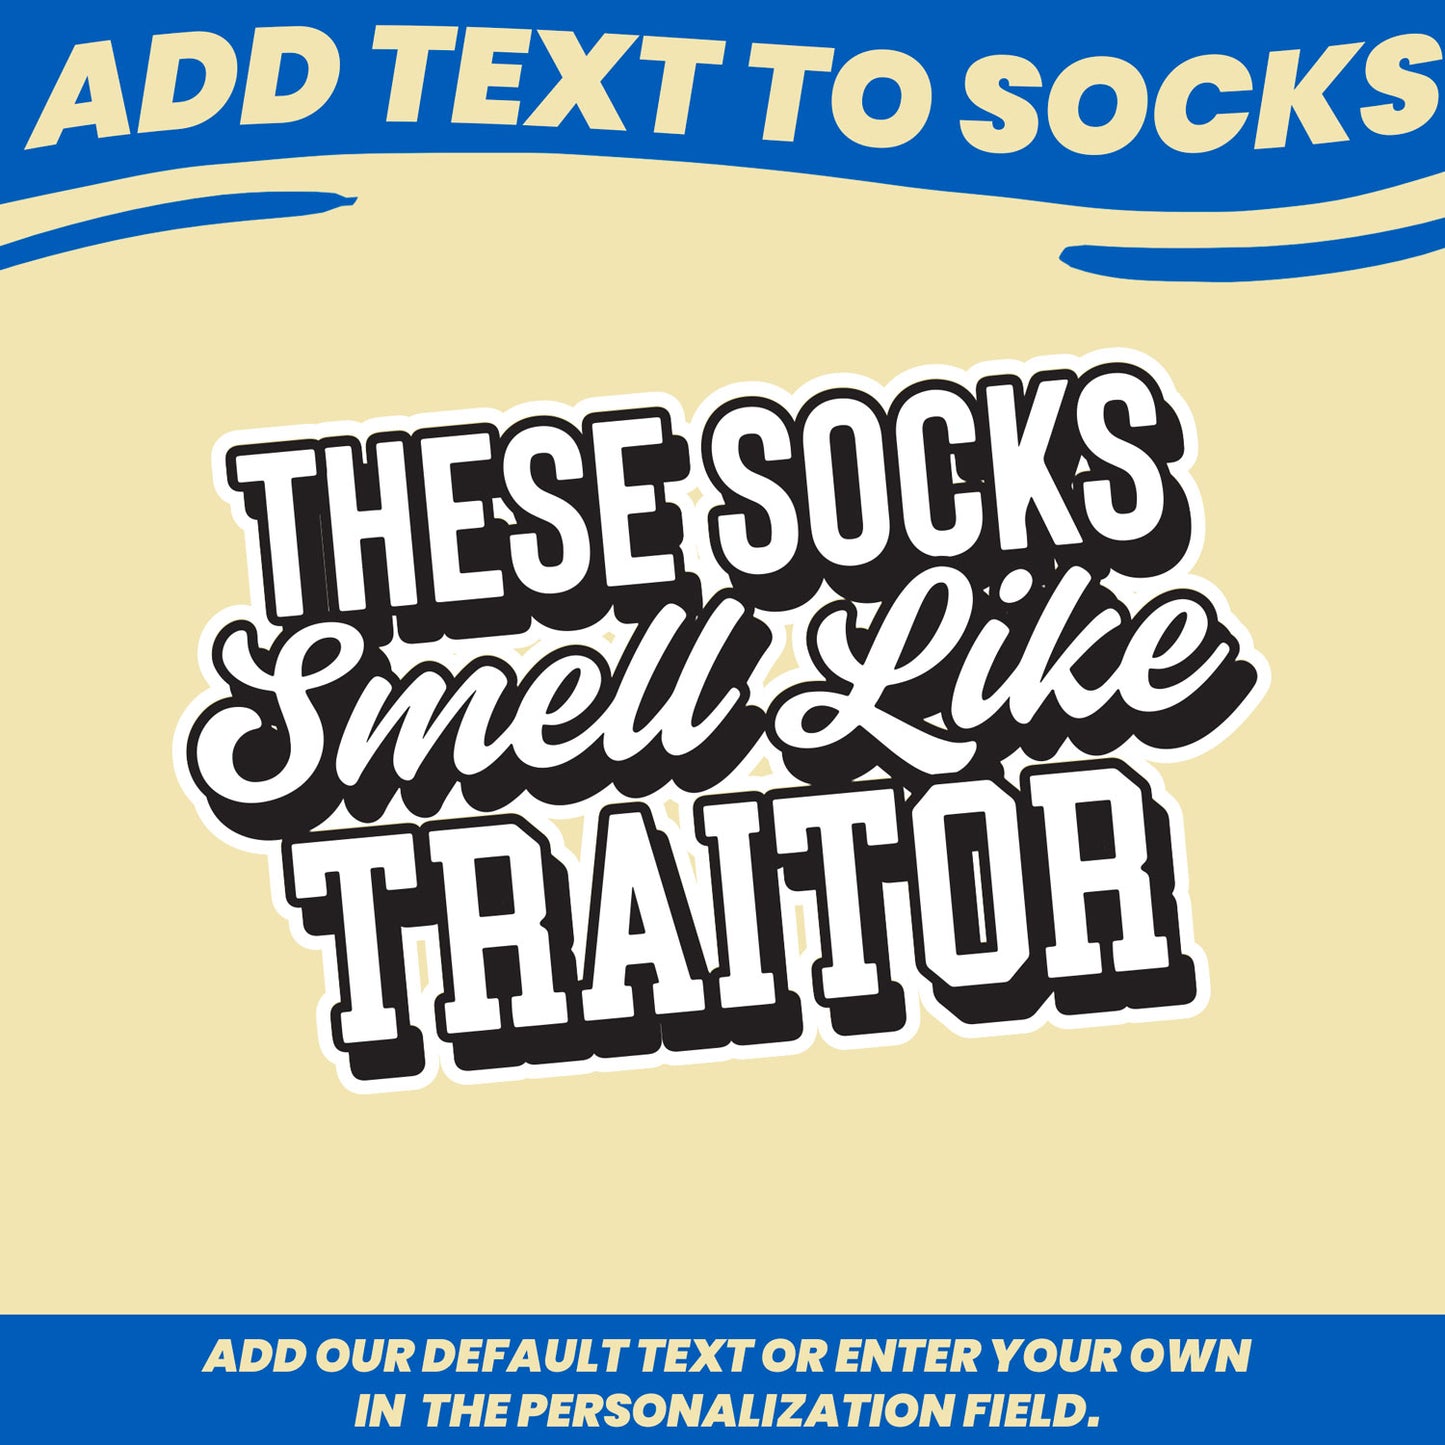 coworker leaving gift personalized socks with faces decorative text on socks that reads &quot;these socks smell like traitor&quot;